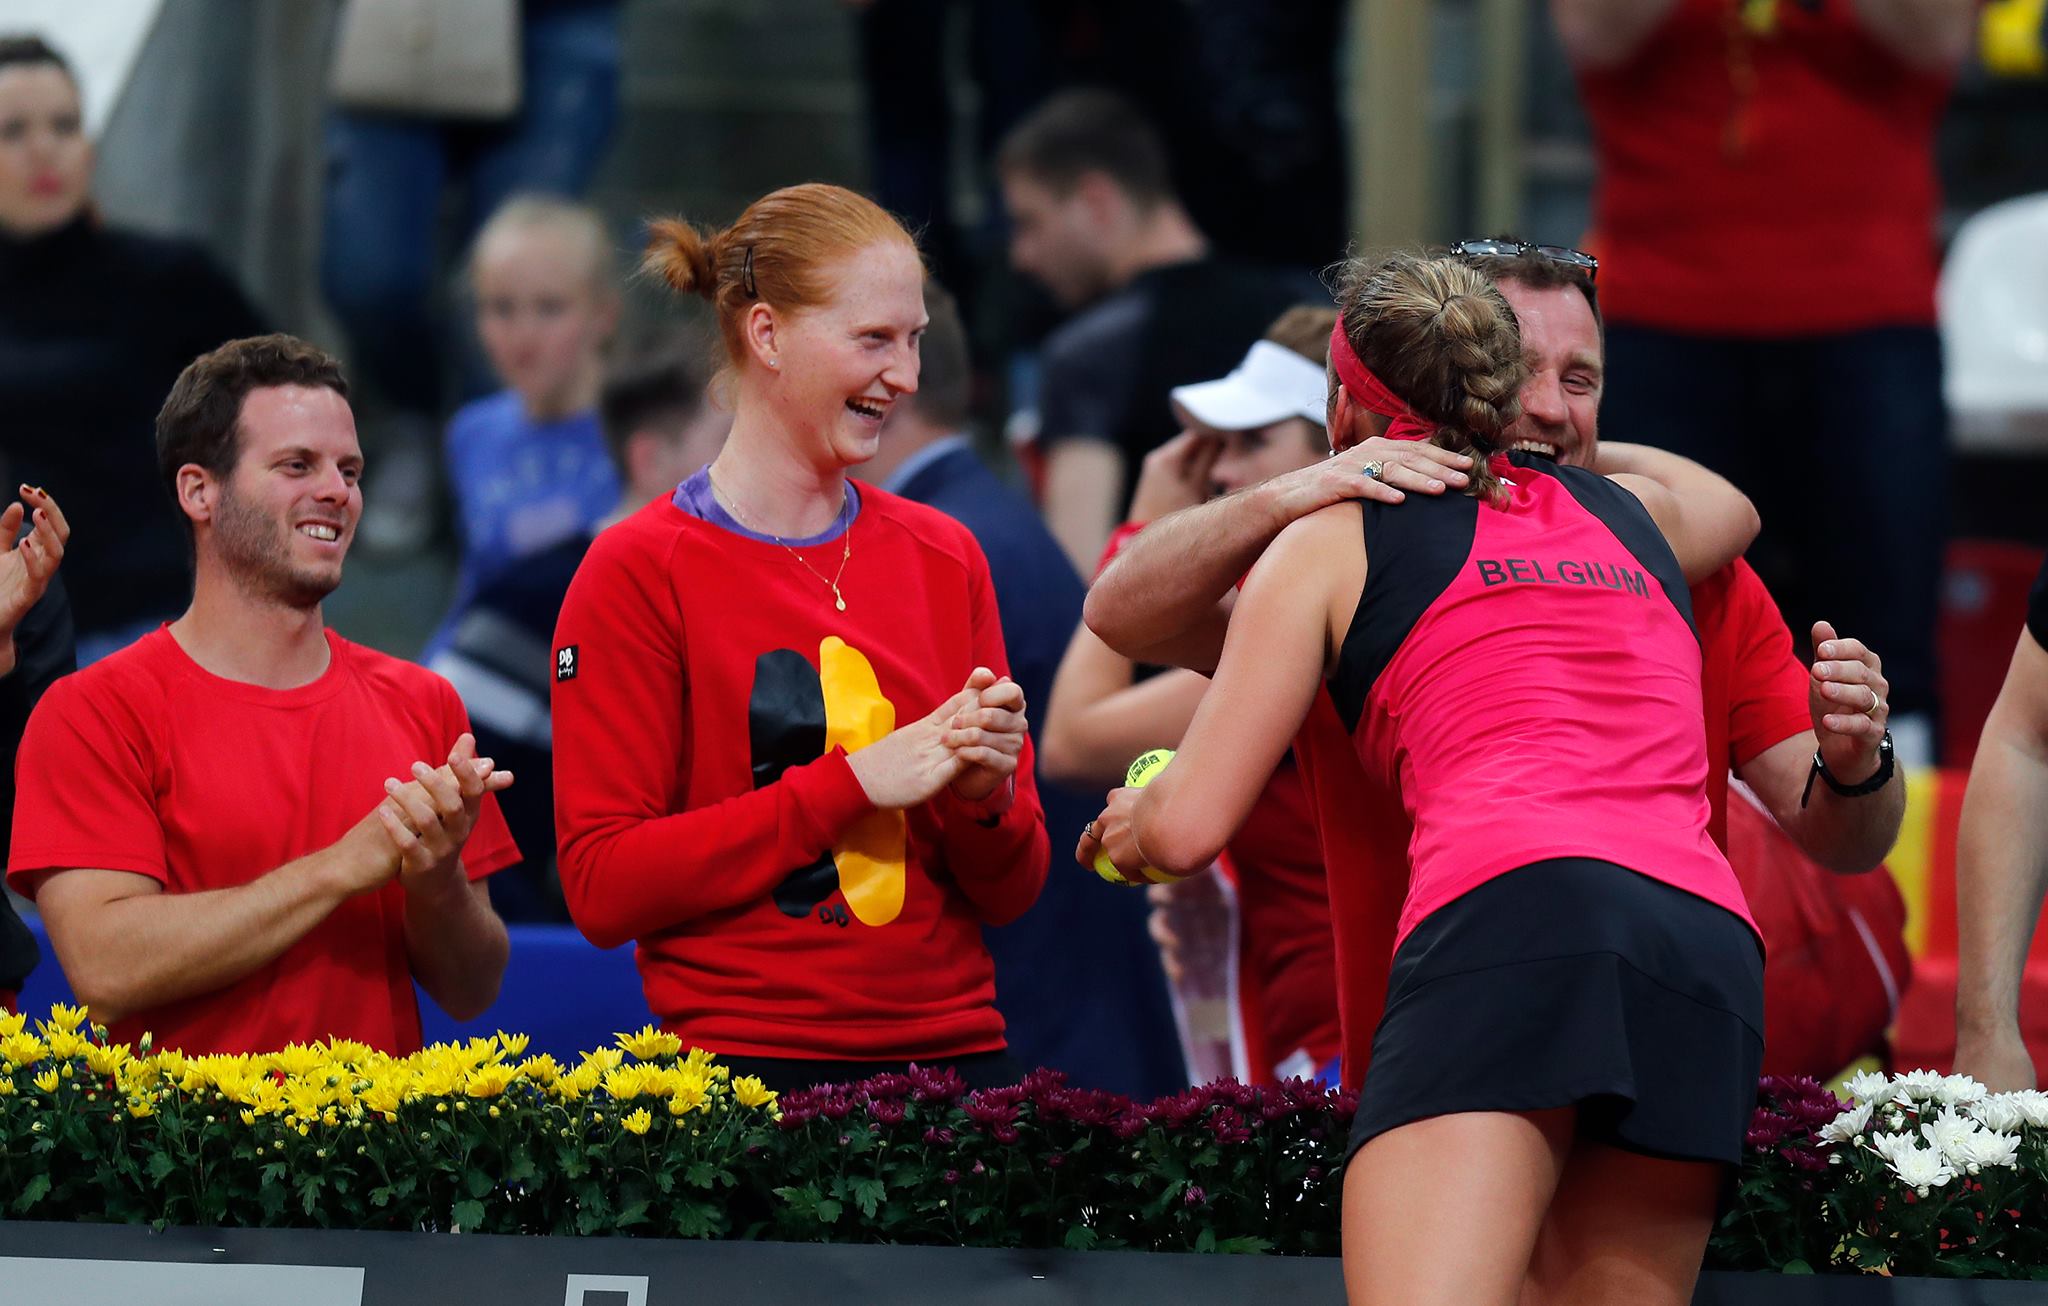 fed cup (3)